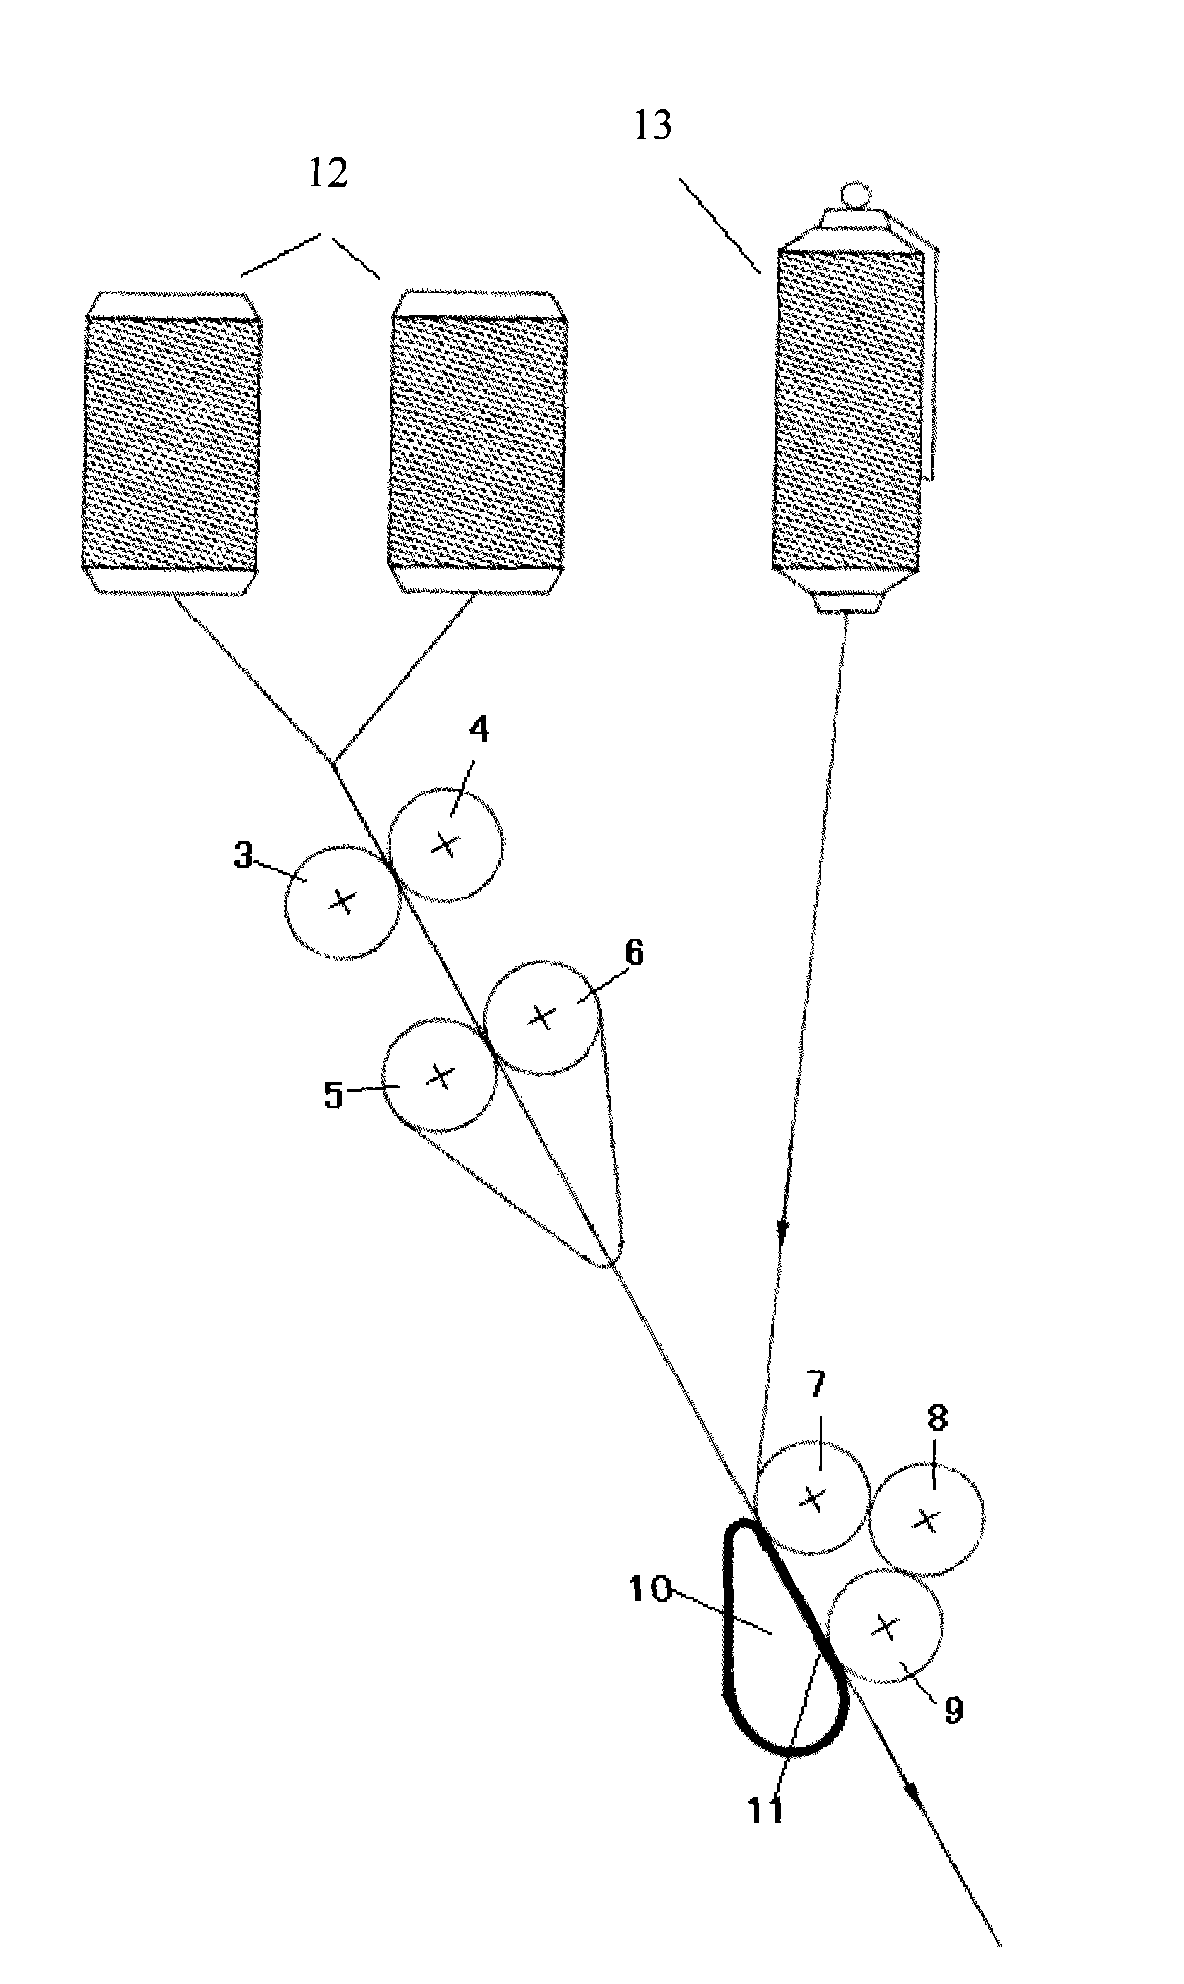 Spinning device for concentrating composite yarns